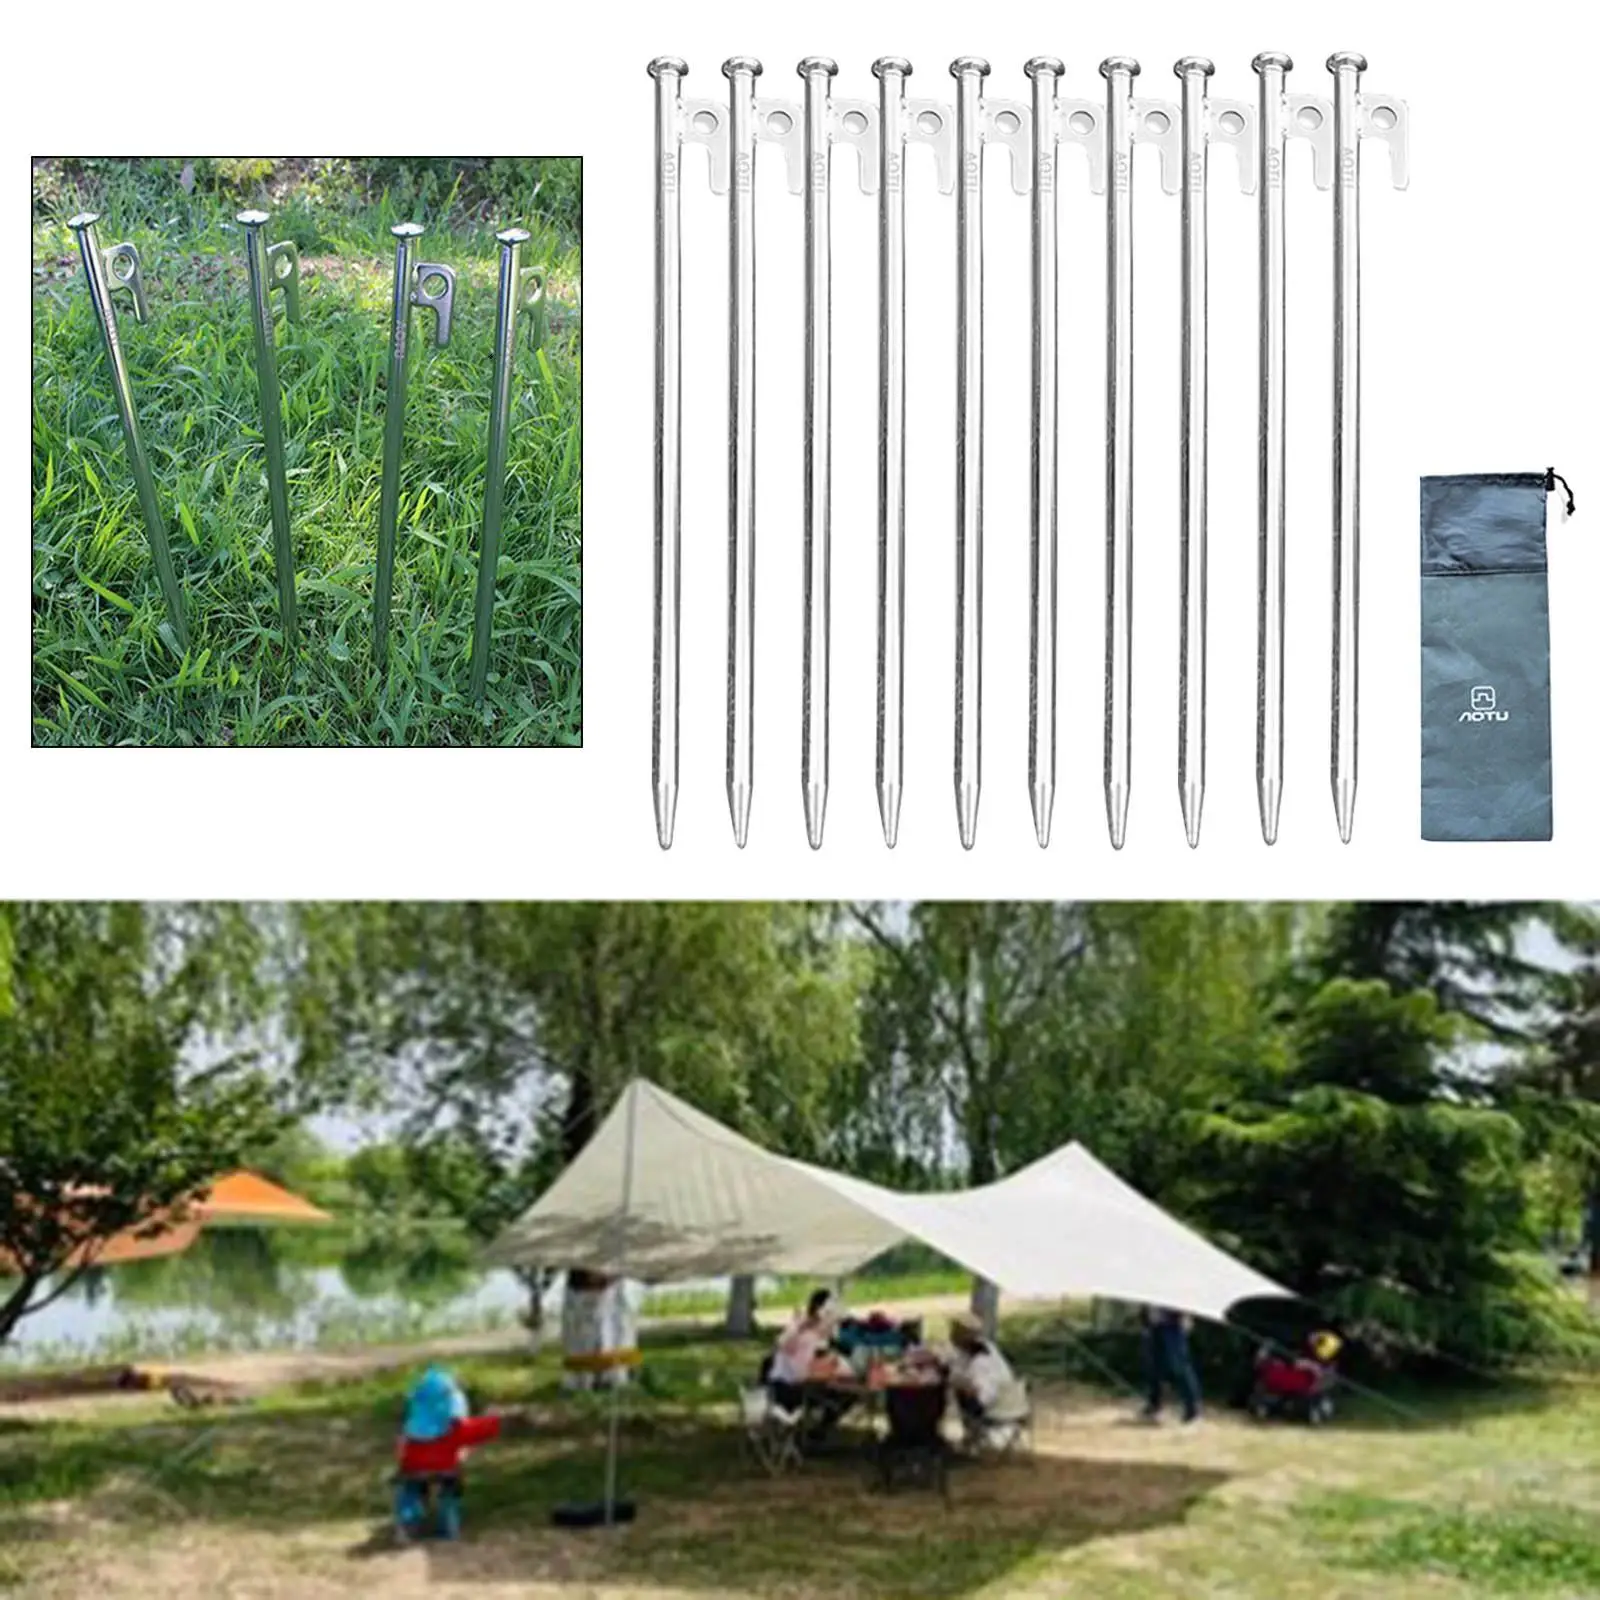 12 Pack Metal Tent Stakes Heavy Duty 12 inch Steel Tent Pegs Ground Black Stakes Spikes for Camping Outdoor Spikes Replacement 